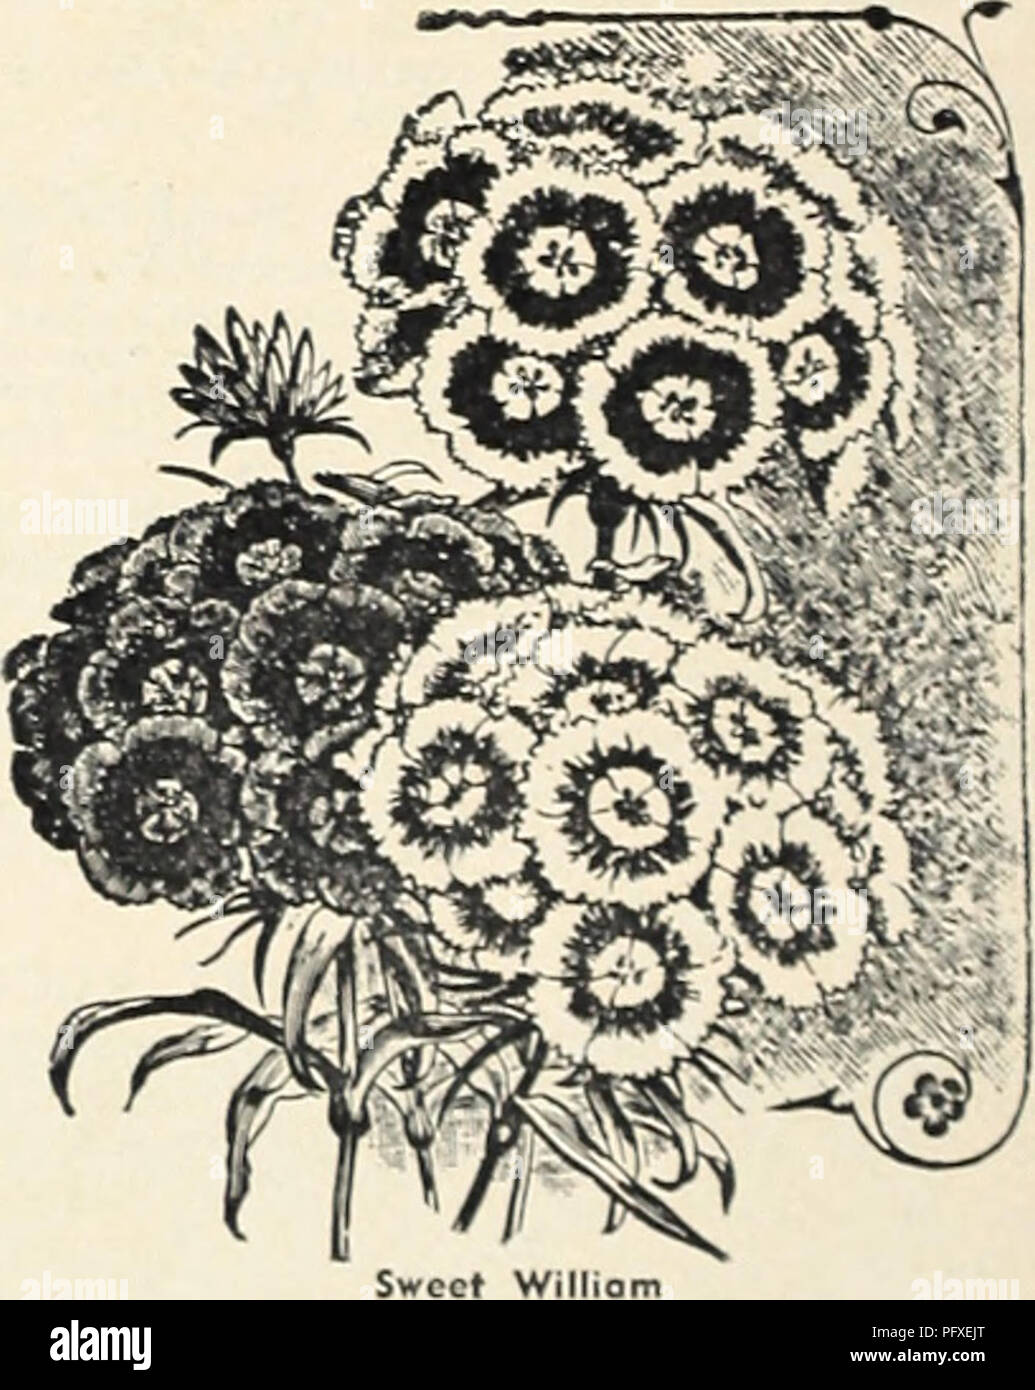 . Currie's garden annual. Flowers Seeds Catalogs; Bulbs (Plants) Seeds Catalogs; Vegetables Seeds Catalogs; Nurseries (Horticulture) Catalogs; Plants, Ornamental Catalogs; Gardening Equipment and supplies Catalogs. STATICE (Sea Lavender I LATIFOLIA — Tufts of leathery leaves, large heads of purplish- blue flowers. Plants, 25c; doi., S2.50; seeds, Pkt., lOe. DUMOSA—Densely packed cush- ions of silvery gray flowers, thickly covered with blossoms. 2 ft. Pkt., 25c. STOKESIA (Cornflower or Stoke's Aster) 18&quot; to 24&quot; high. Handsome Cen- taurea-like lavender blossoms, each measurina from 4&q Stock Photo